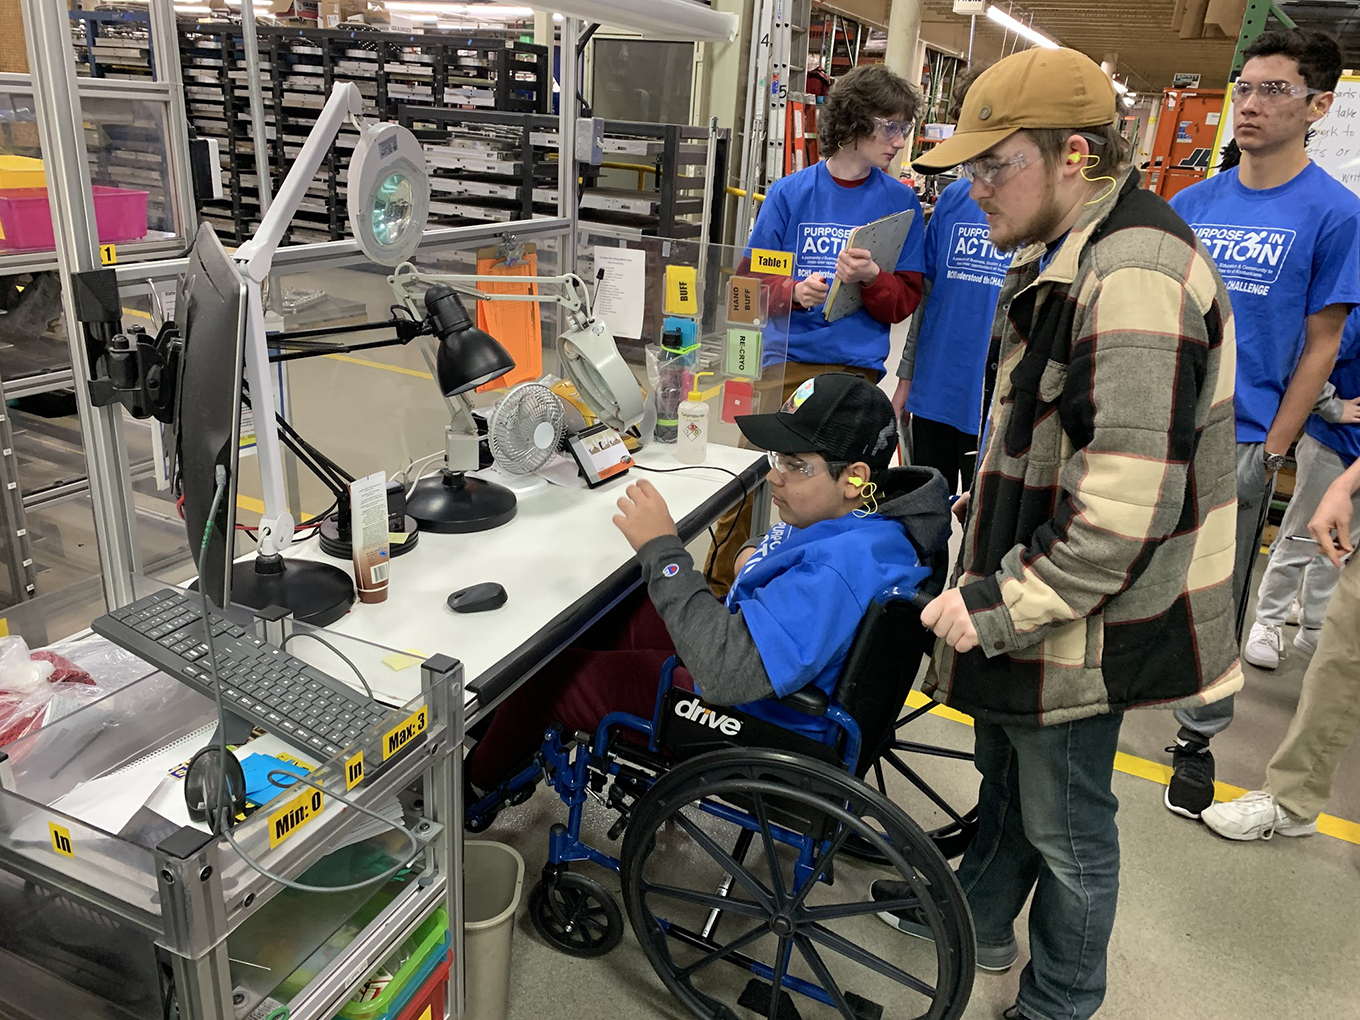 Multiple students, including one in a wheelchair, surround a workbench